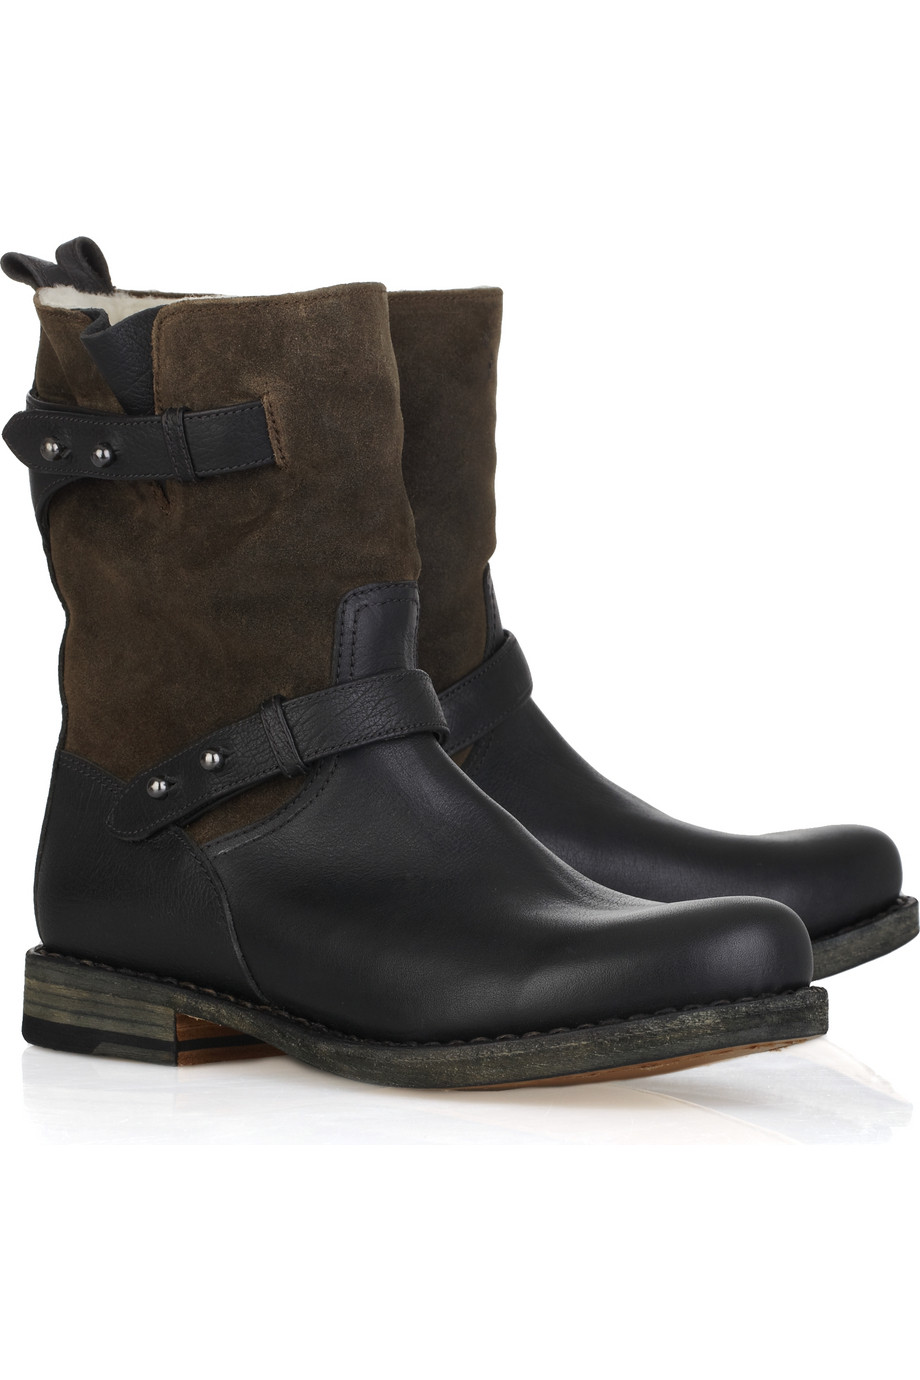 Rag & Bone Moto Leather and Suede Boot in Brown (black) Lyst